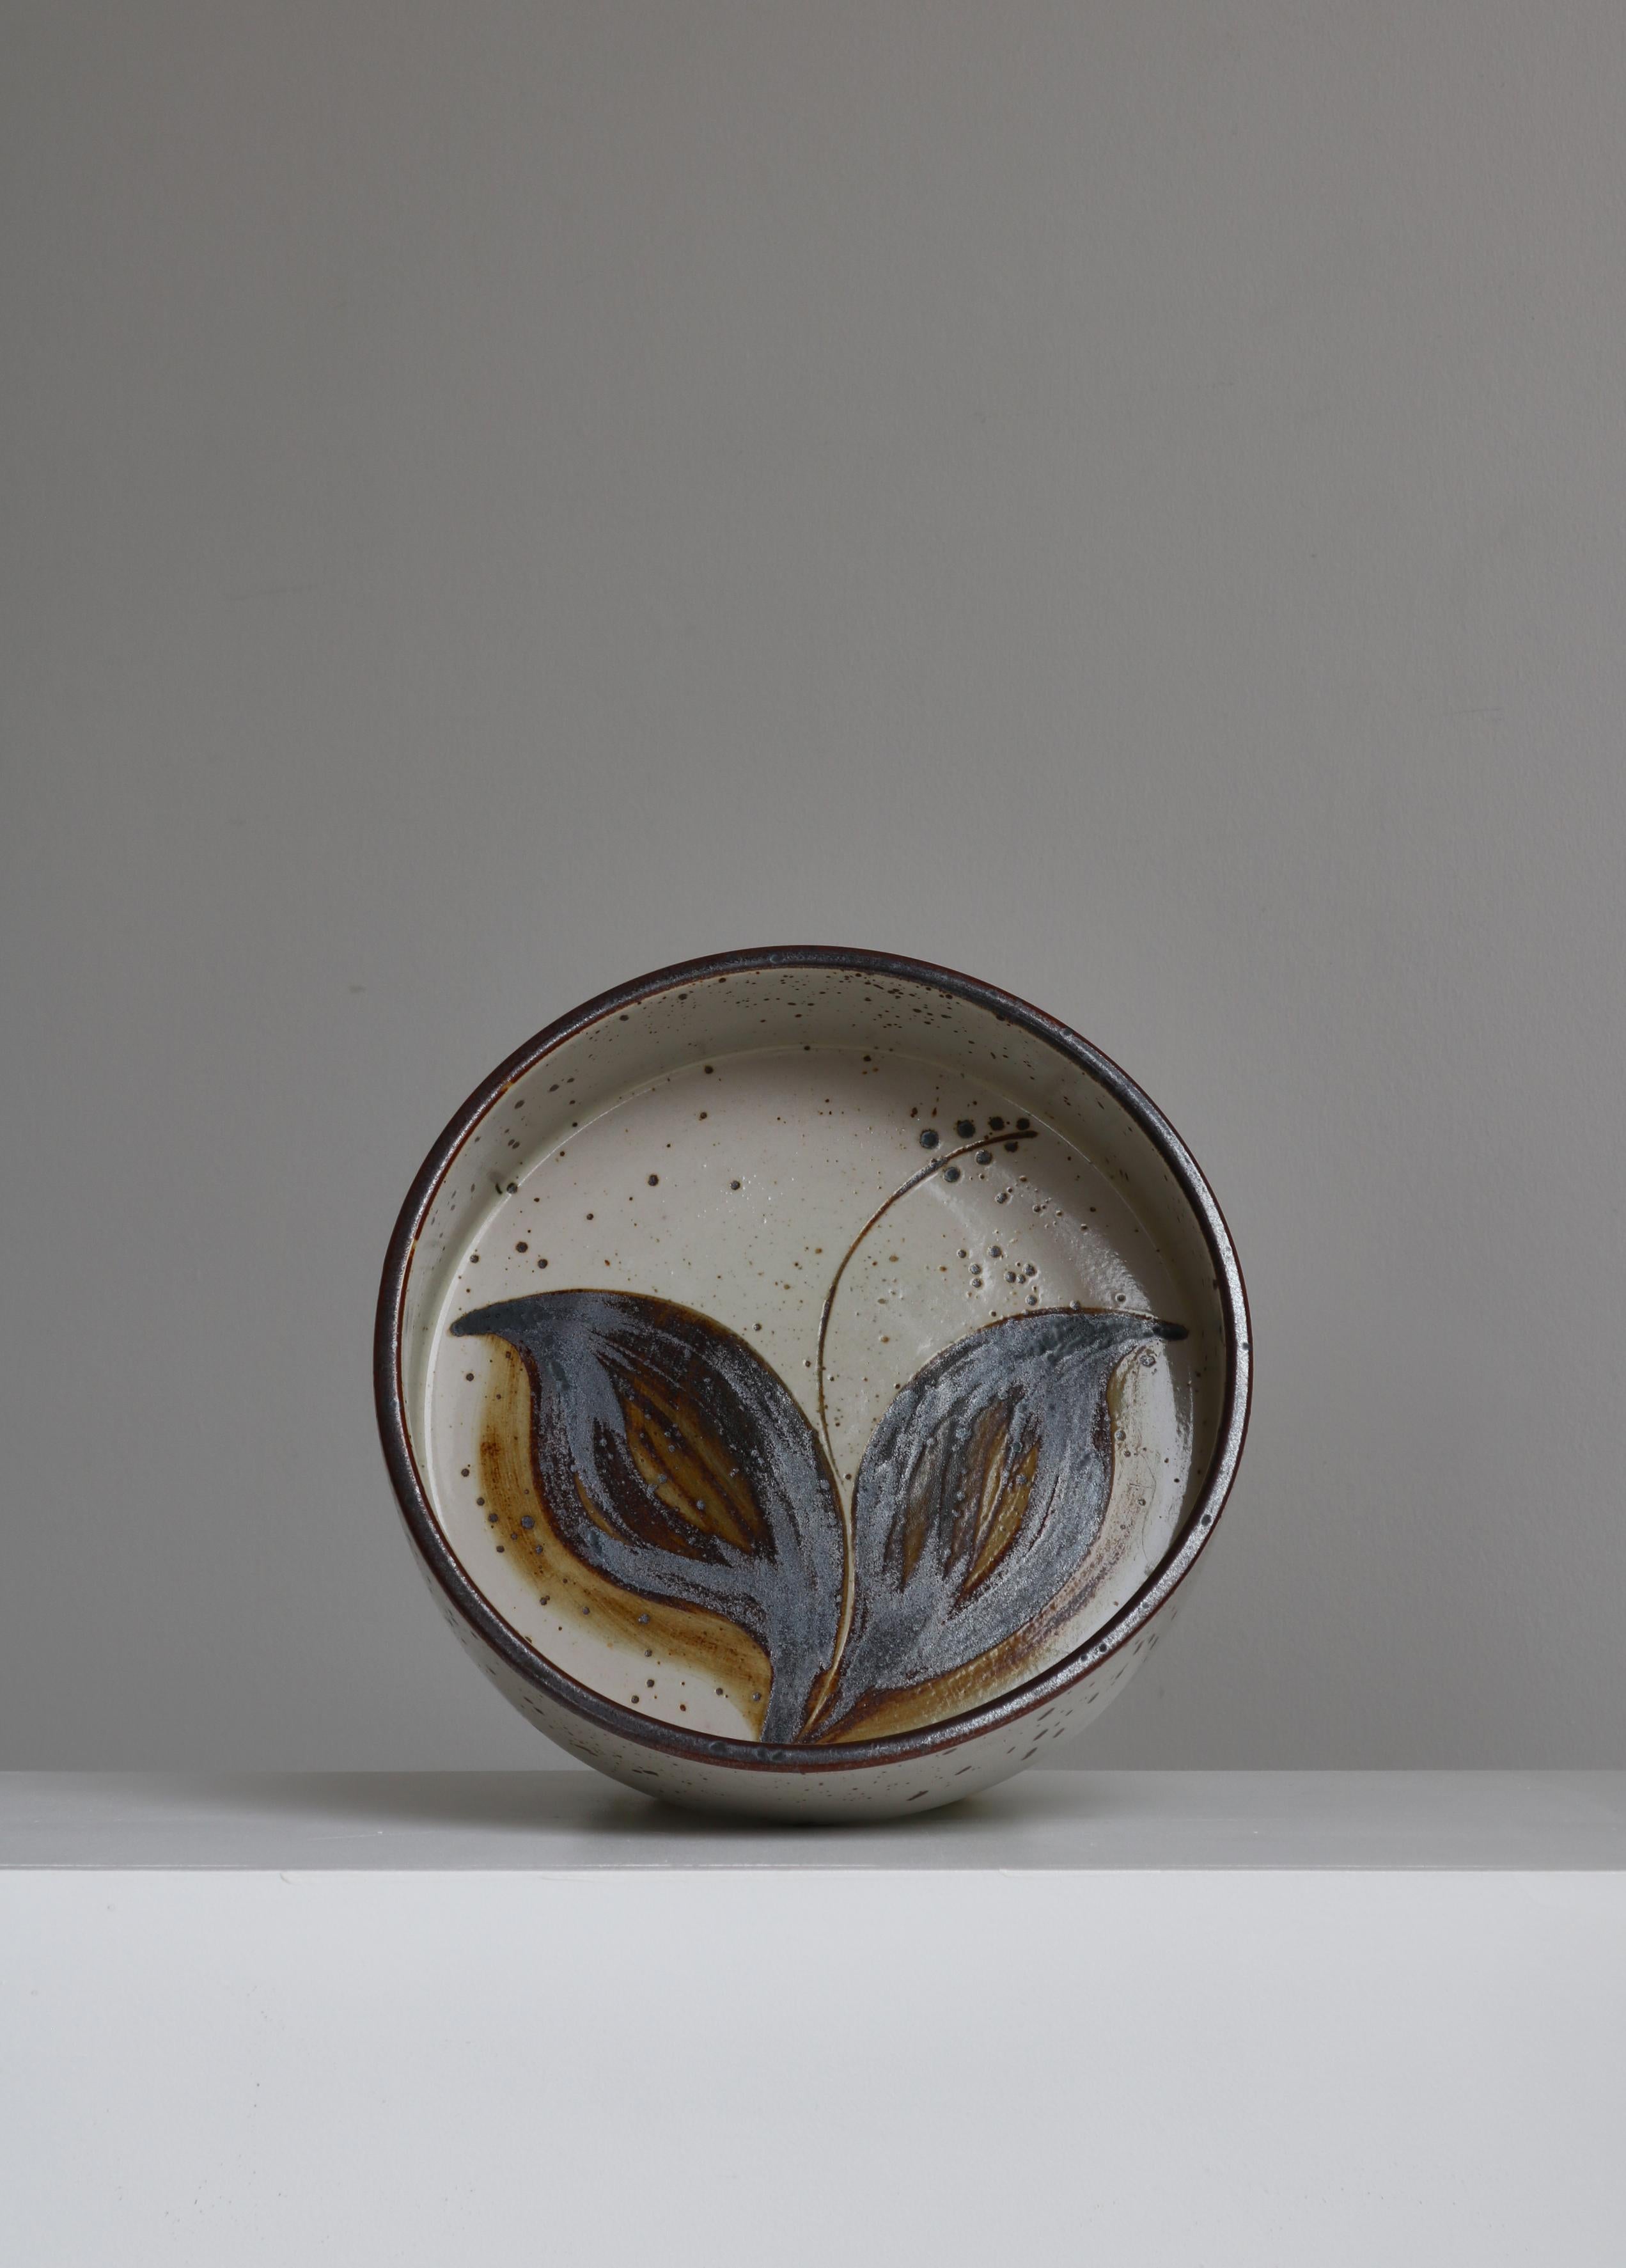 Large beautiful stoneware bowl handmade at Søholm Stoneware, Denmark in the 1970s. The bowl is hand decorated with a Japanese inspired floral motif depicting a stylized 